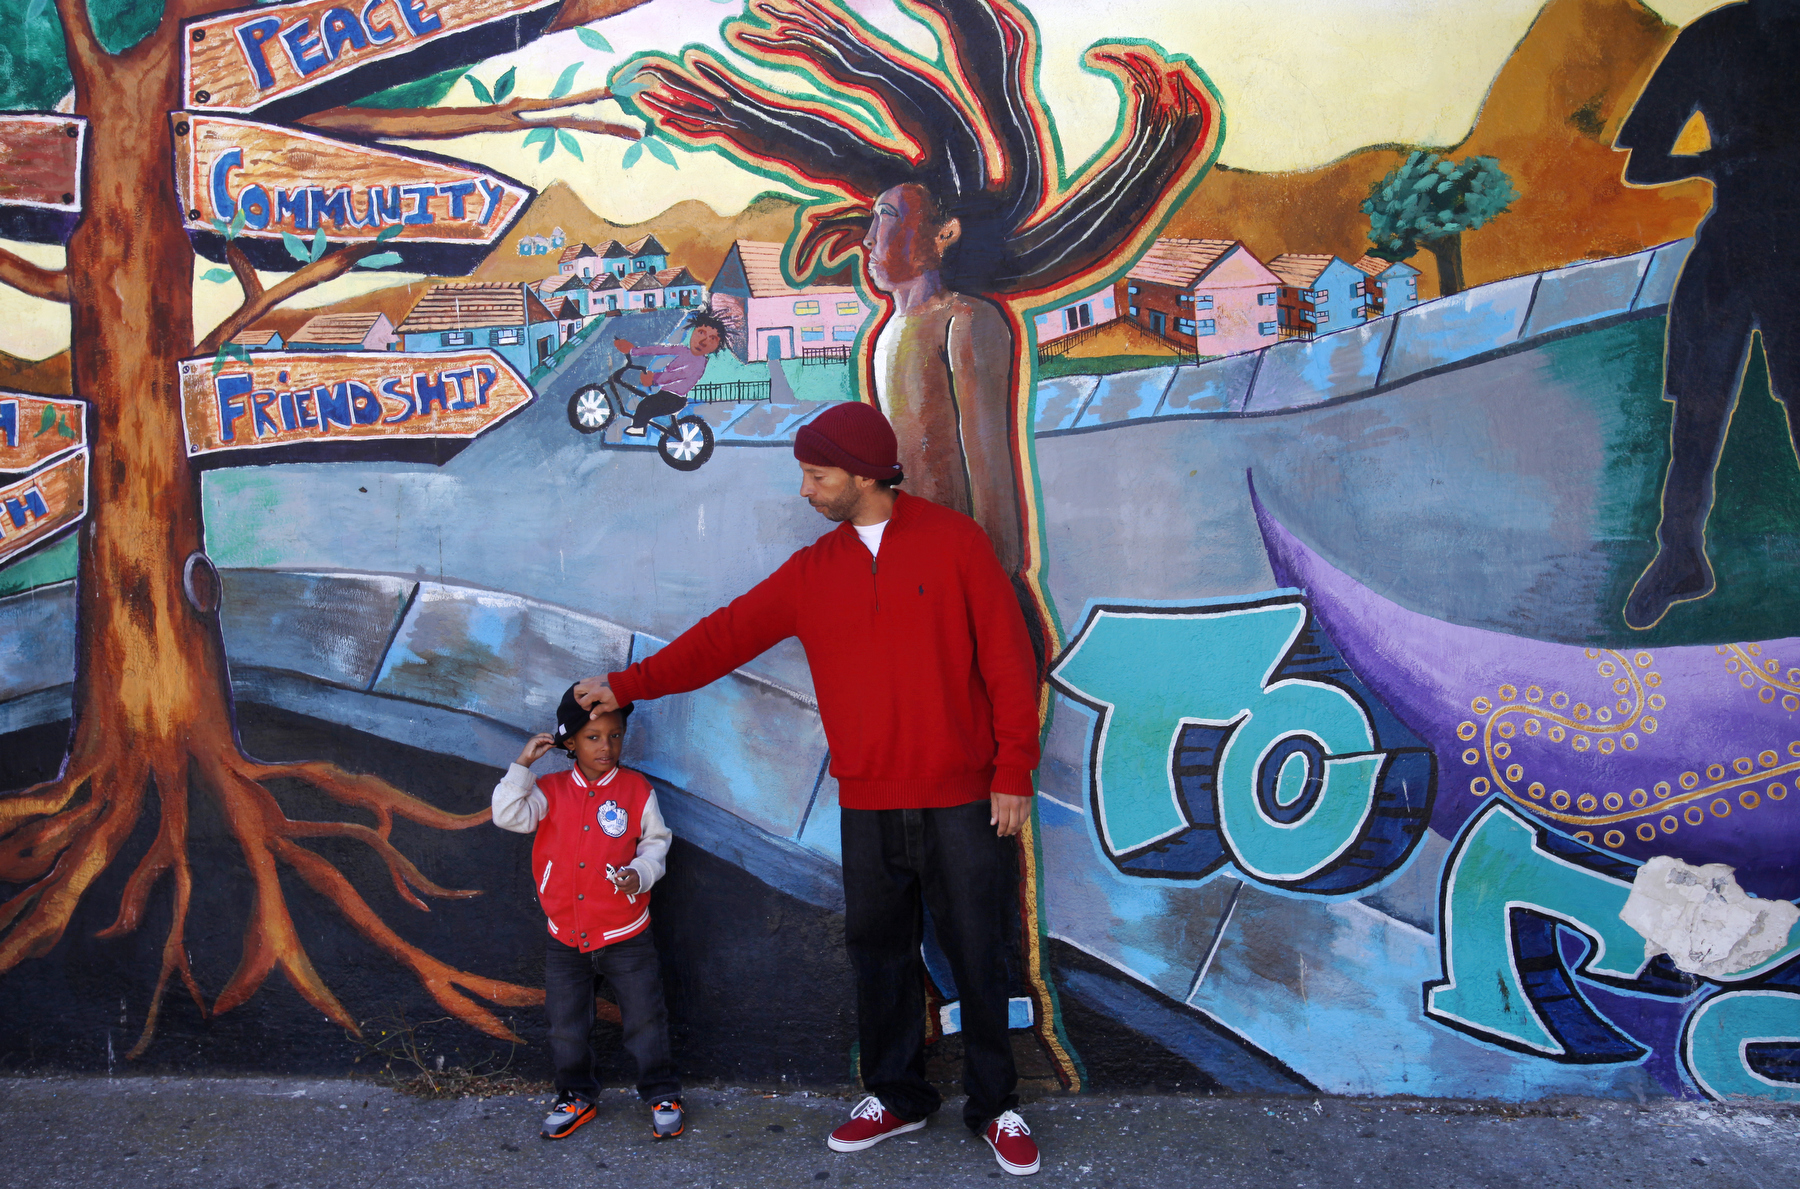 Sekou Carson adjusts the hat on his son Zakai Carson, 4, as they lean up against a community mural titled {quote}How Do You Shine{quote} while the two were out for a walk during Sekou\'s visit to the neighborhood to see his son July 3, 2014 in the Visitacion Valley neighborhood in San Francisco, Calif. {quote}My heart goes out to him and his family,{quote} Sekou said of the shooting, adding that he didn't feel the neighborhood was more unsafe now. {quote}I think it was an isolated incident,{quote} he said. Last Friday, June 27, outreach counselor Allen Calloway was shot and killed while playing dodgeball with children at a basketball court near Herz playground in Visitacion Valley. Since then, the summer program held at the playground has been closed temporarily and the area has had much fewer children and residents using it.